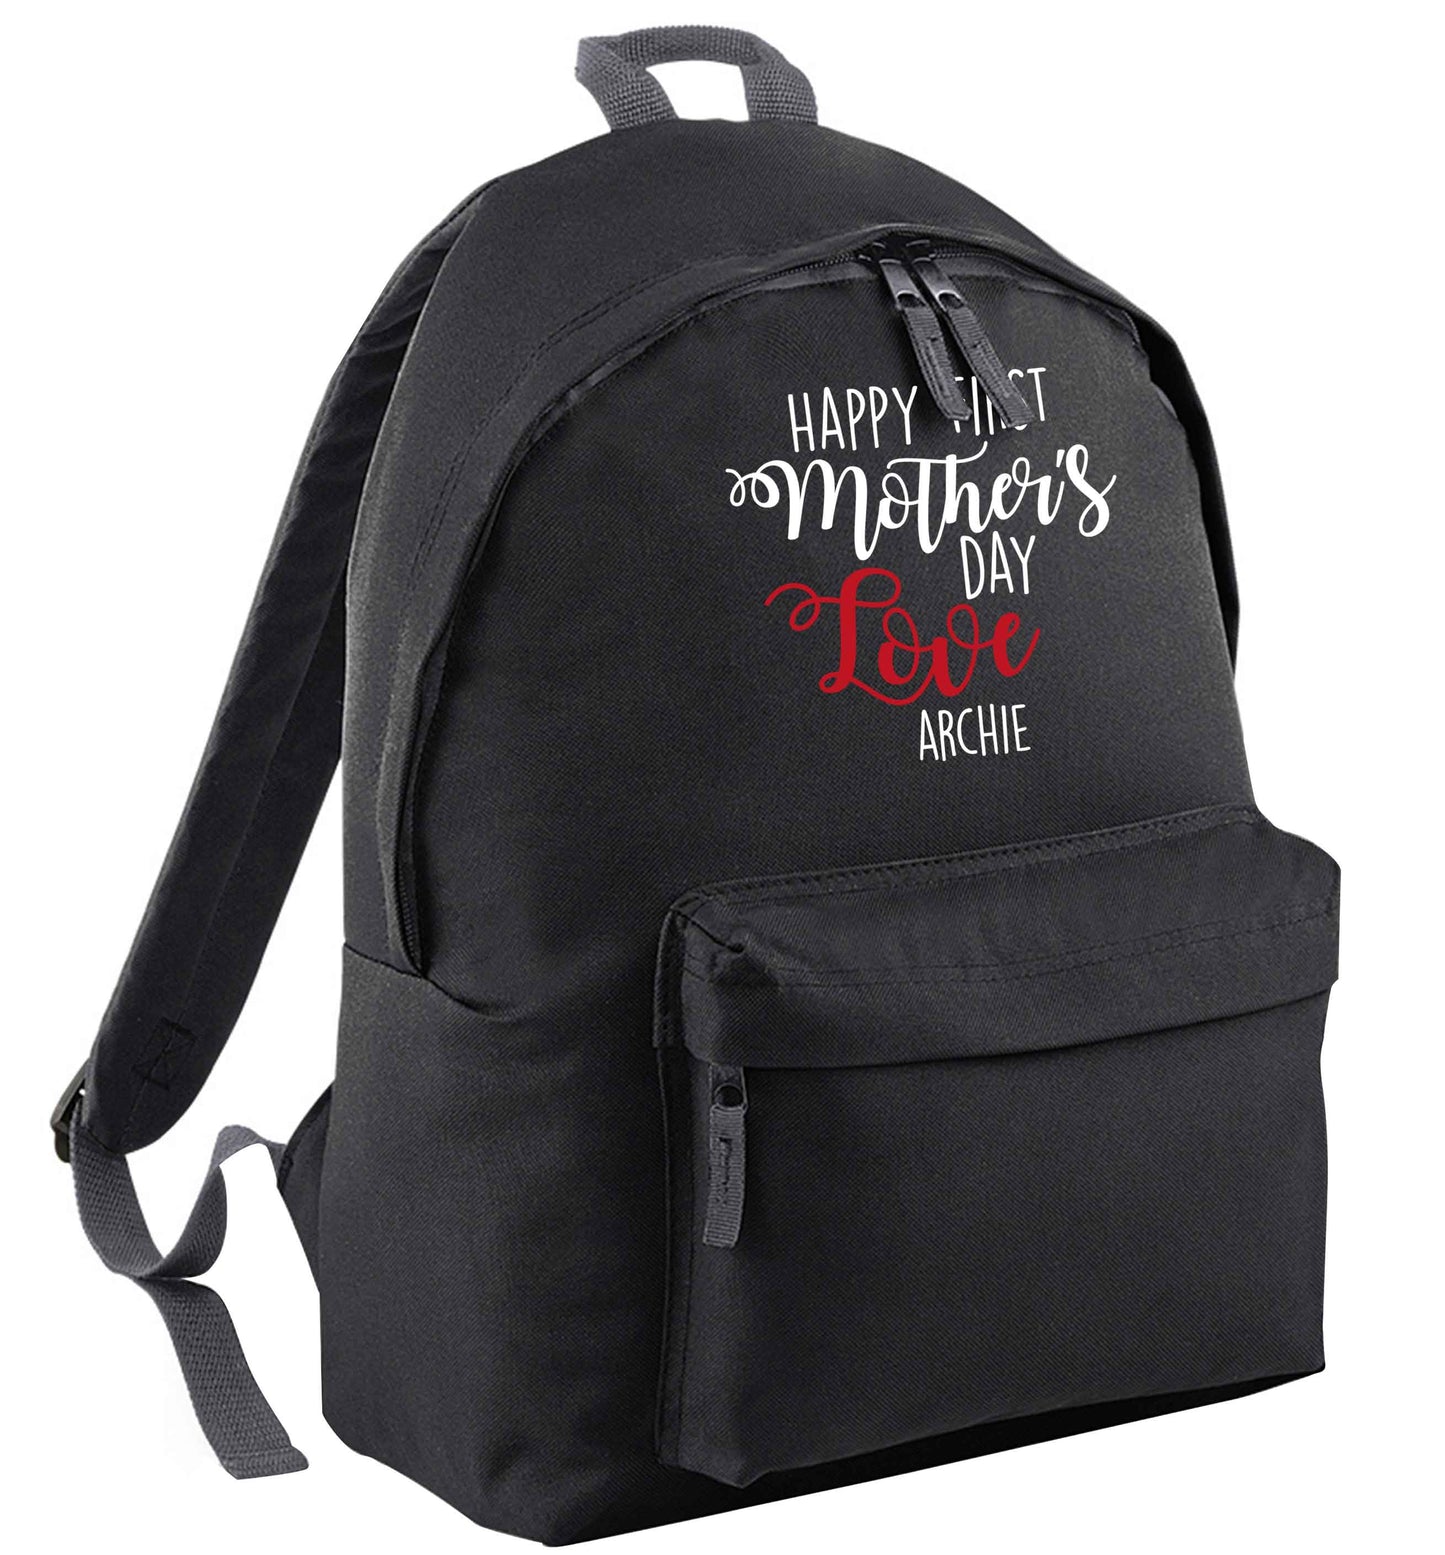 Personalised happy first mother's day love | Children's backpack